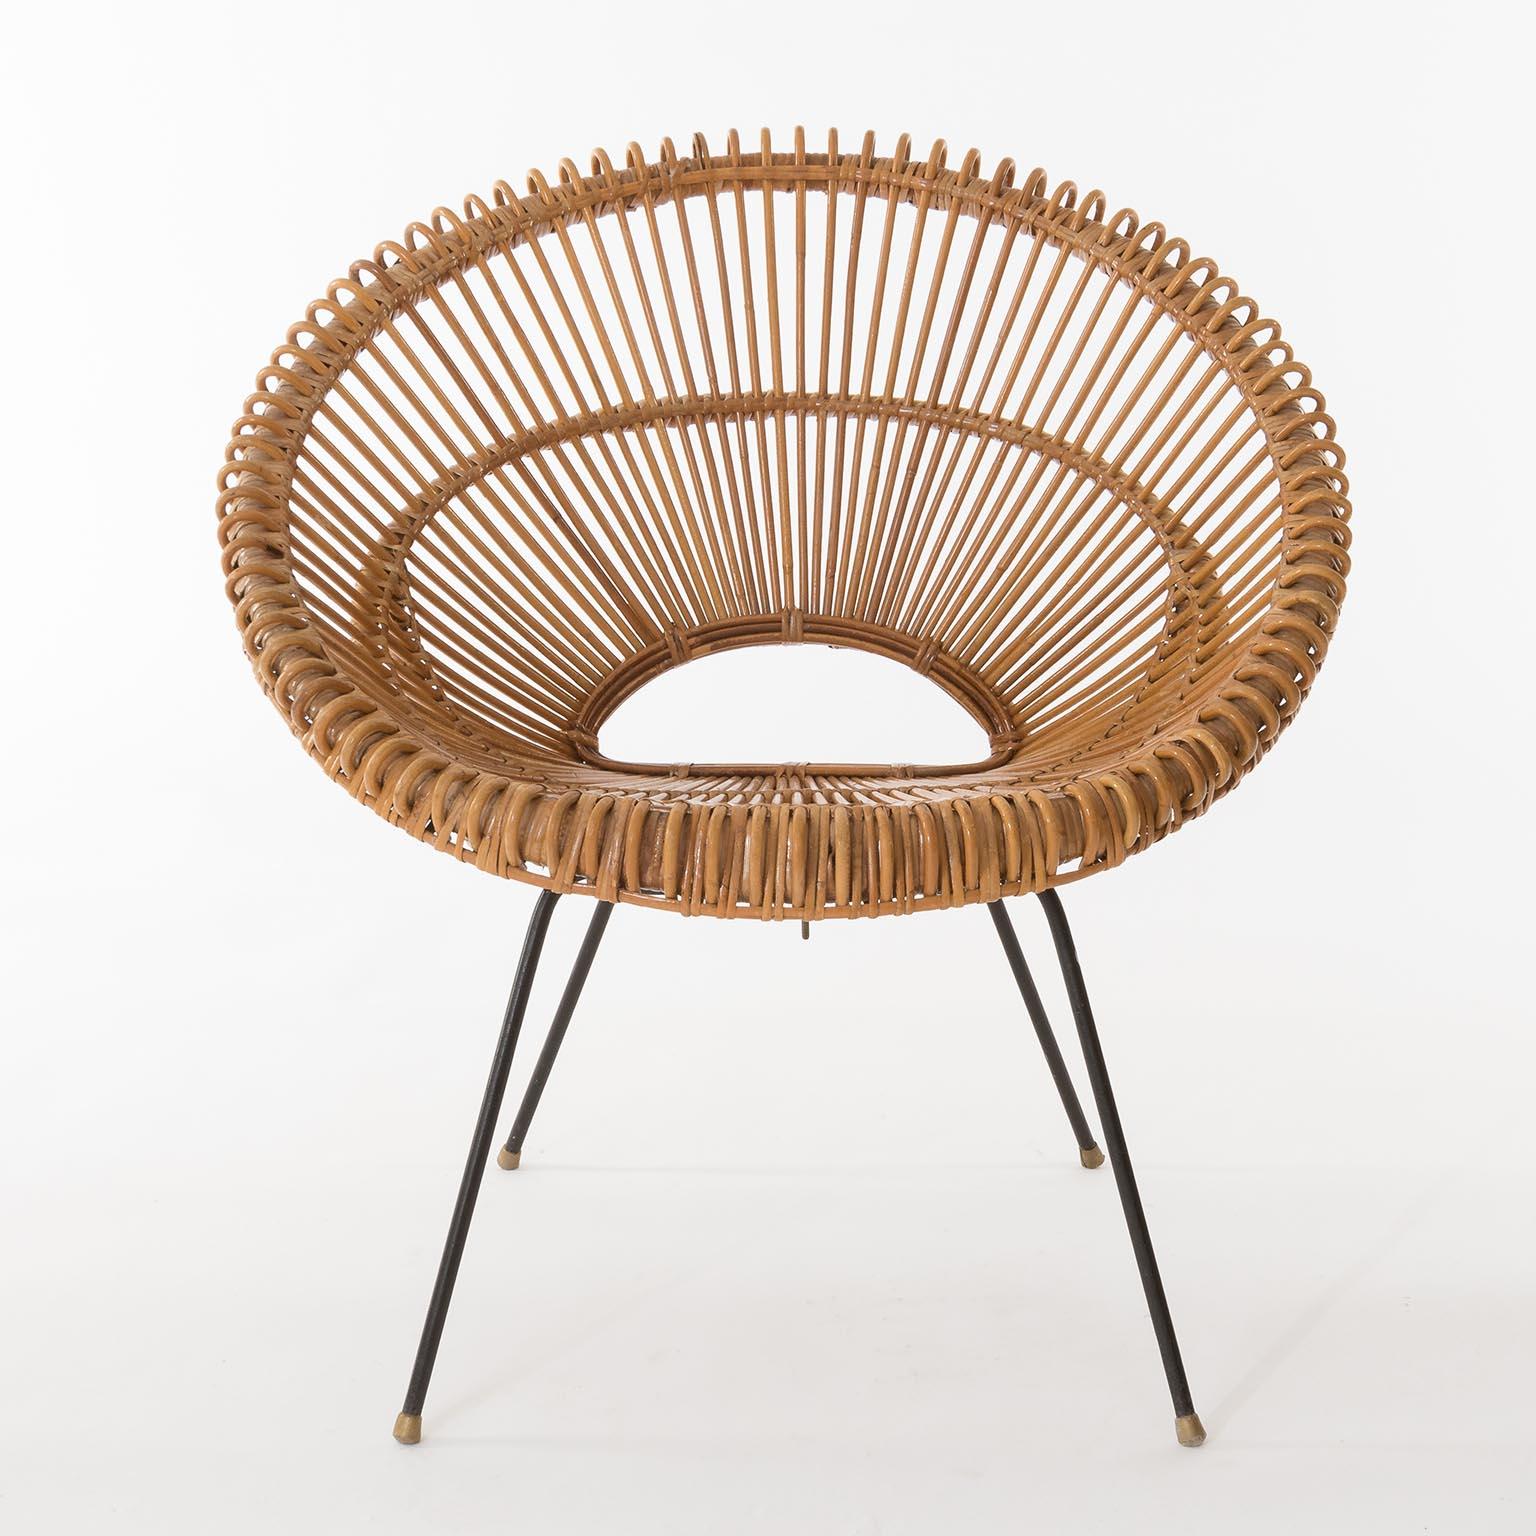 A set of four Riviera chairs made of bamboo, rattan and black metal attributed to Janine Abraham, Dirk Rol, France, circa 1960.